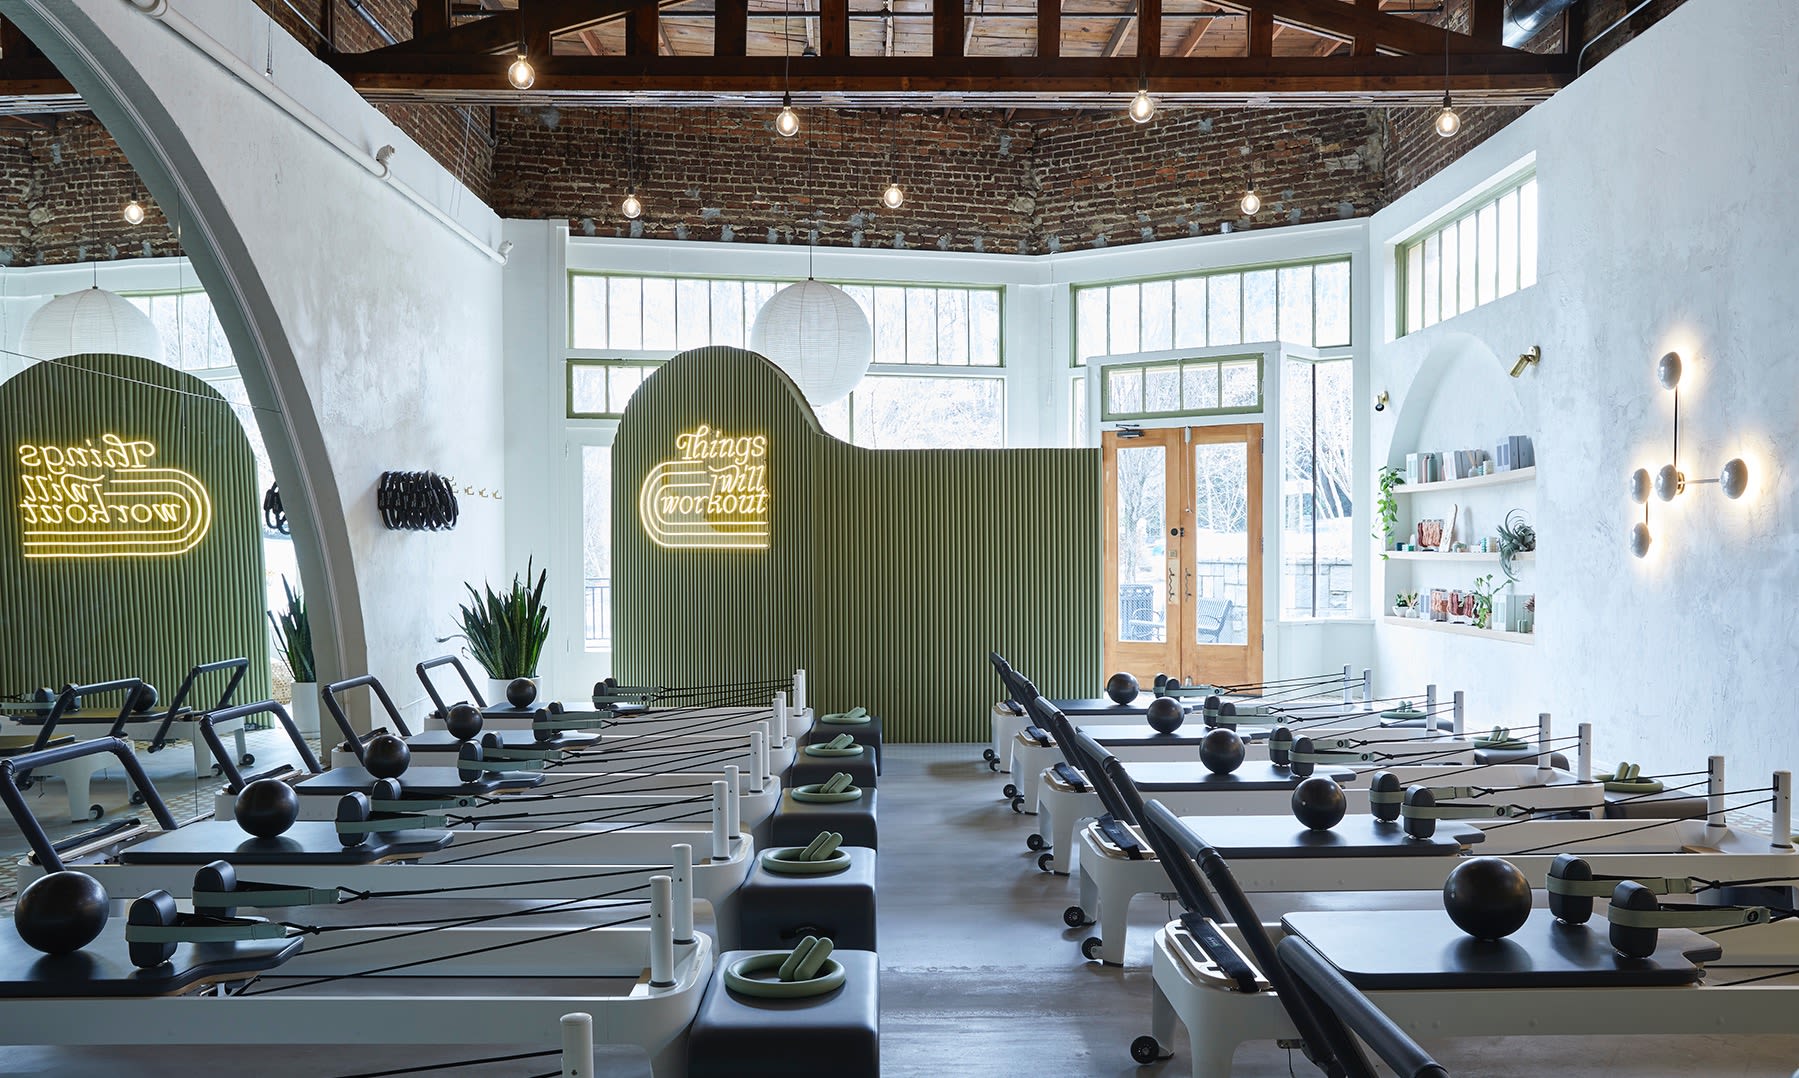 Come with me to my 50th Pilates class at The Studio Pilates in Atlanta, Pilates